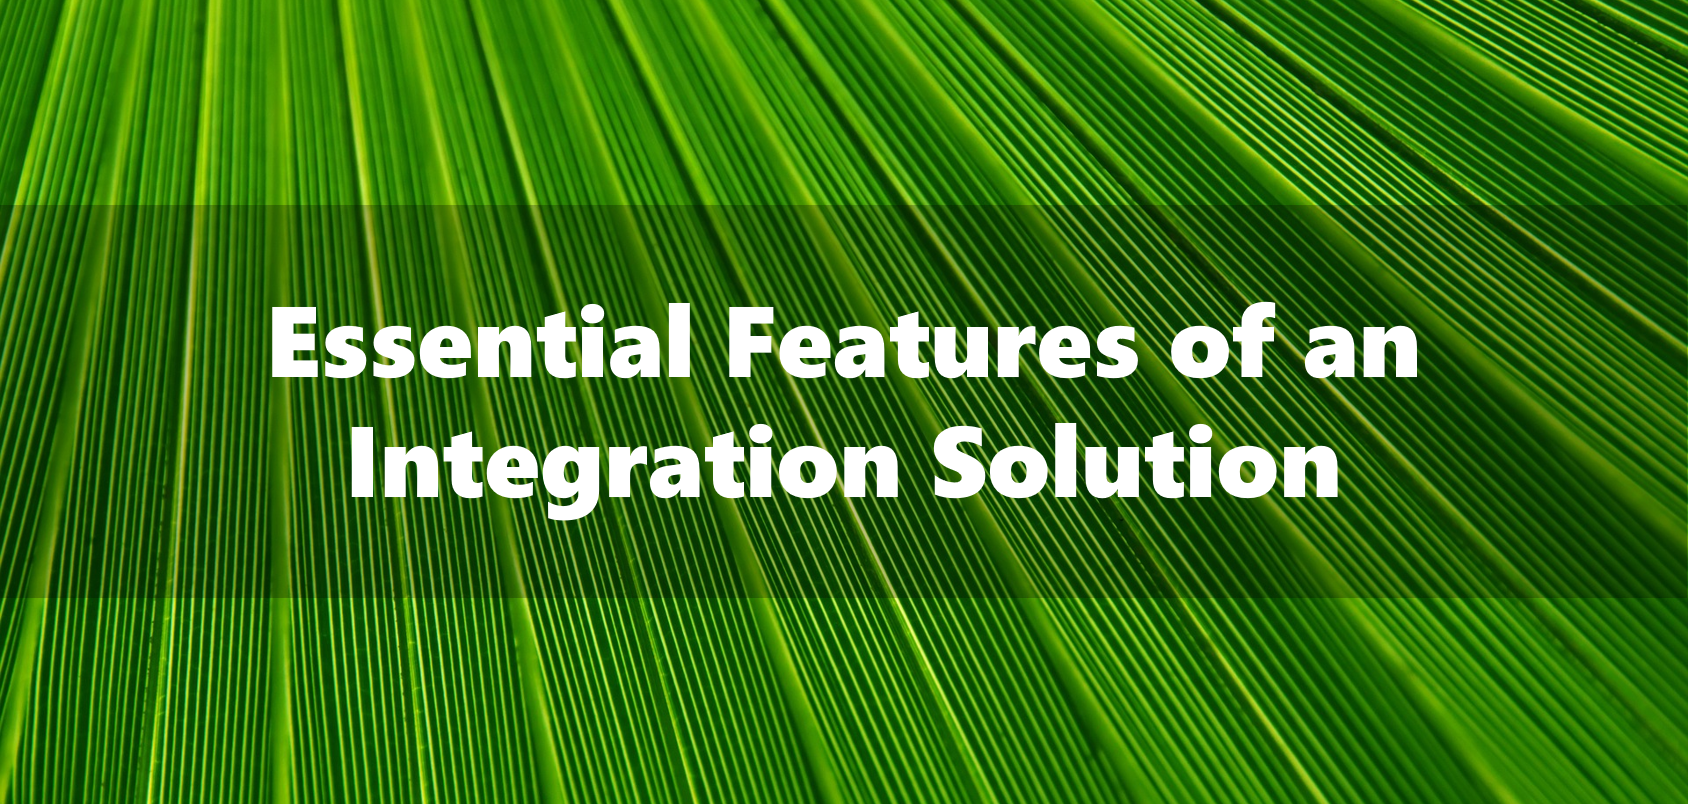 essential-features-integration-solution